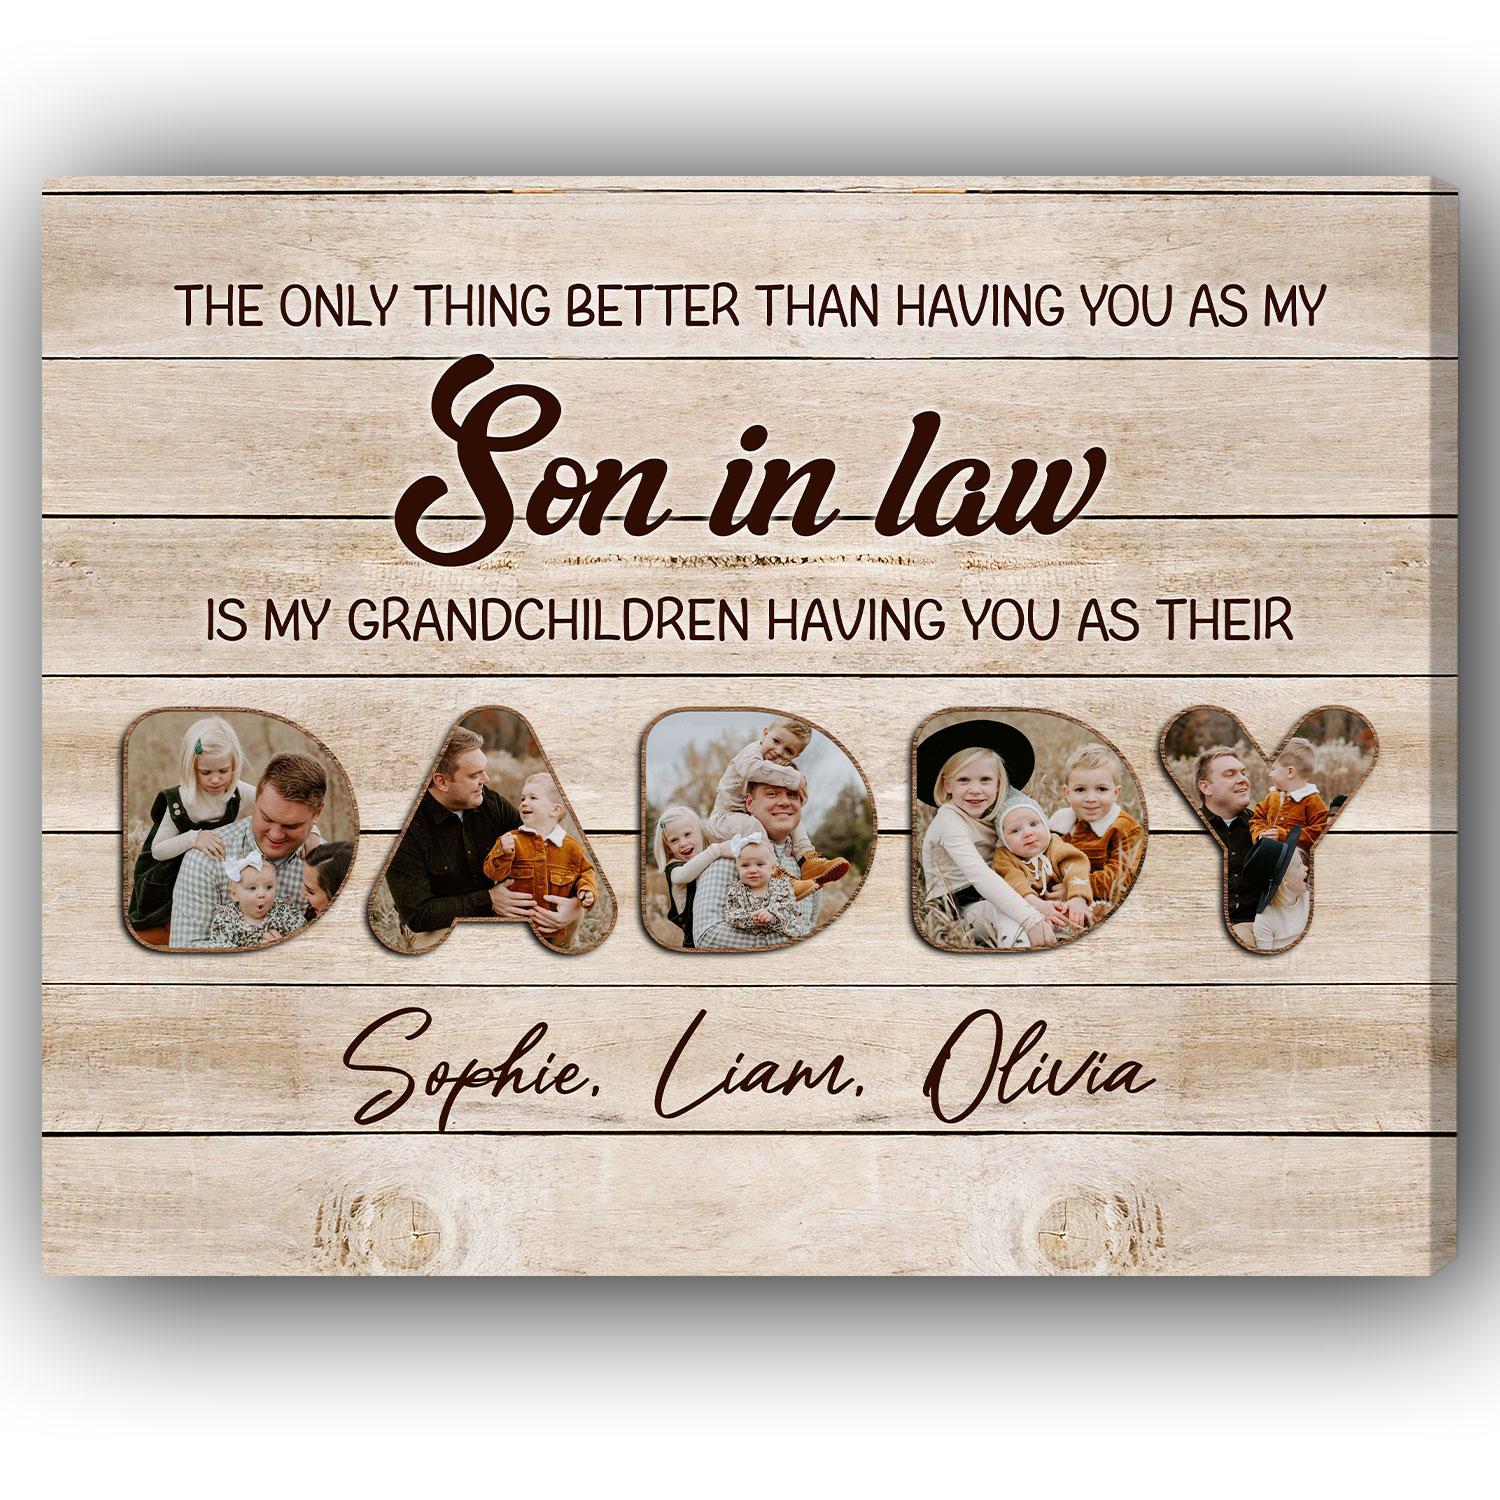 The Only Thing Better Than Having You As My Son In Law - Personalized  gift For Son In Law - Custom Canvas Print - MyMindfulGifts